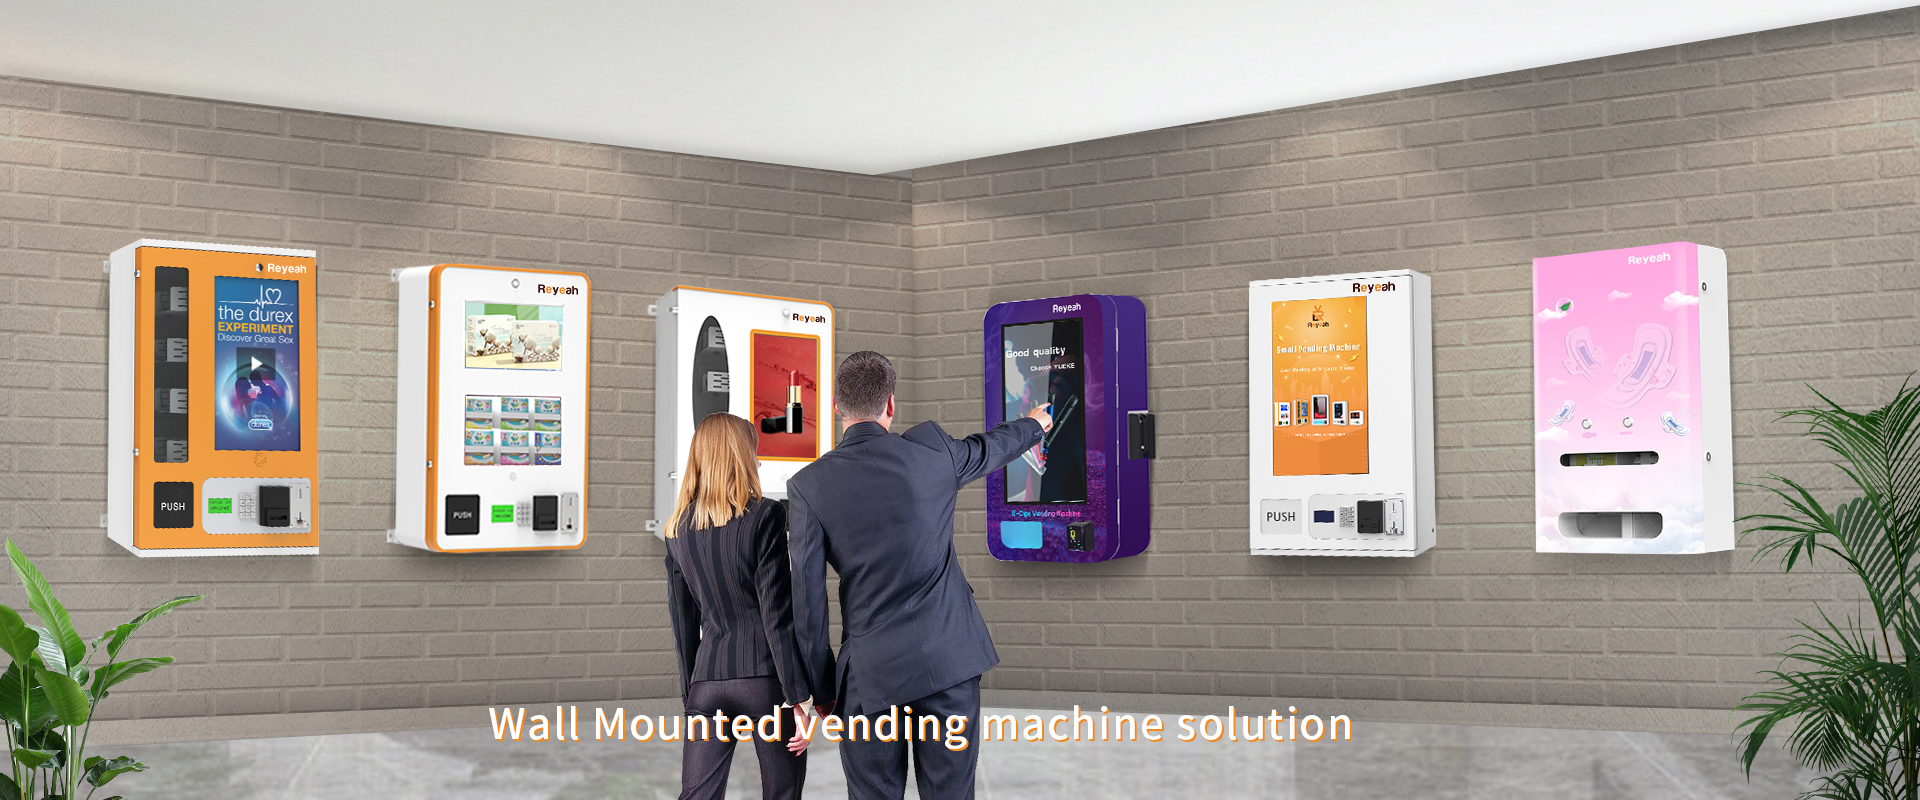 Wall Mounted Vending Machines Solution